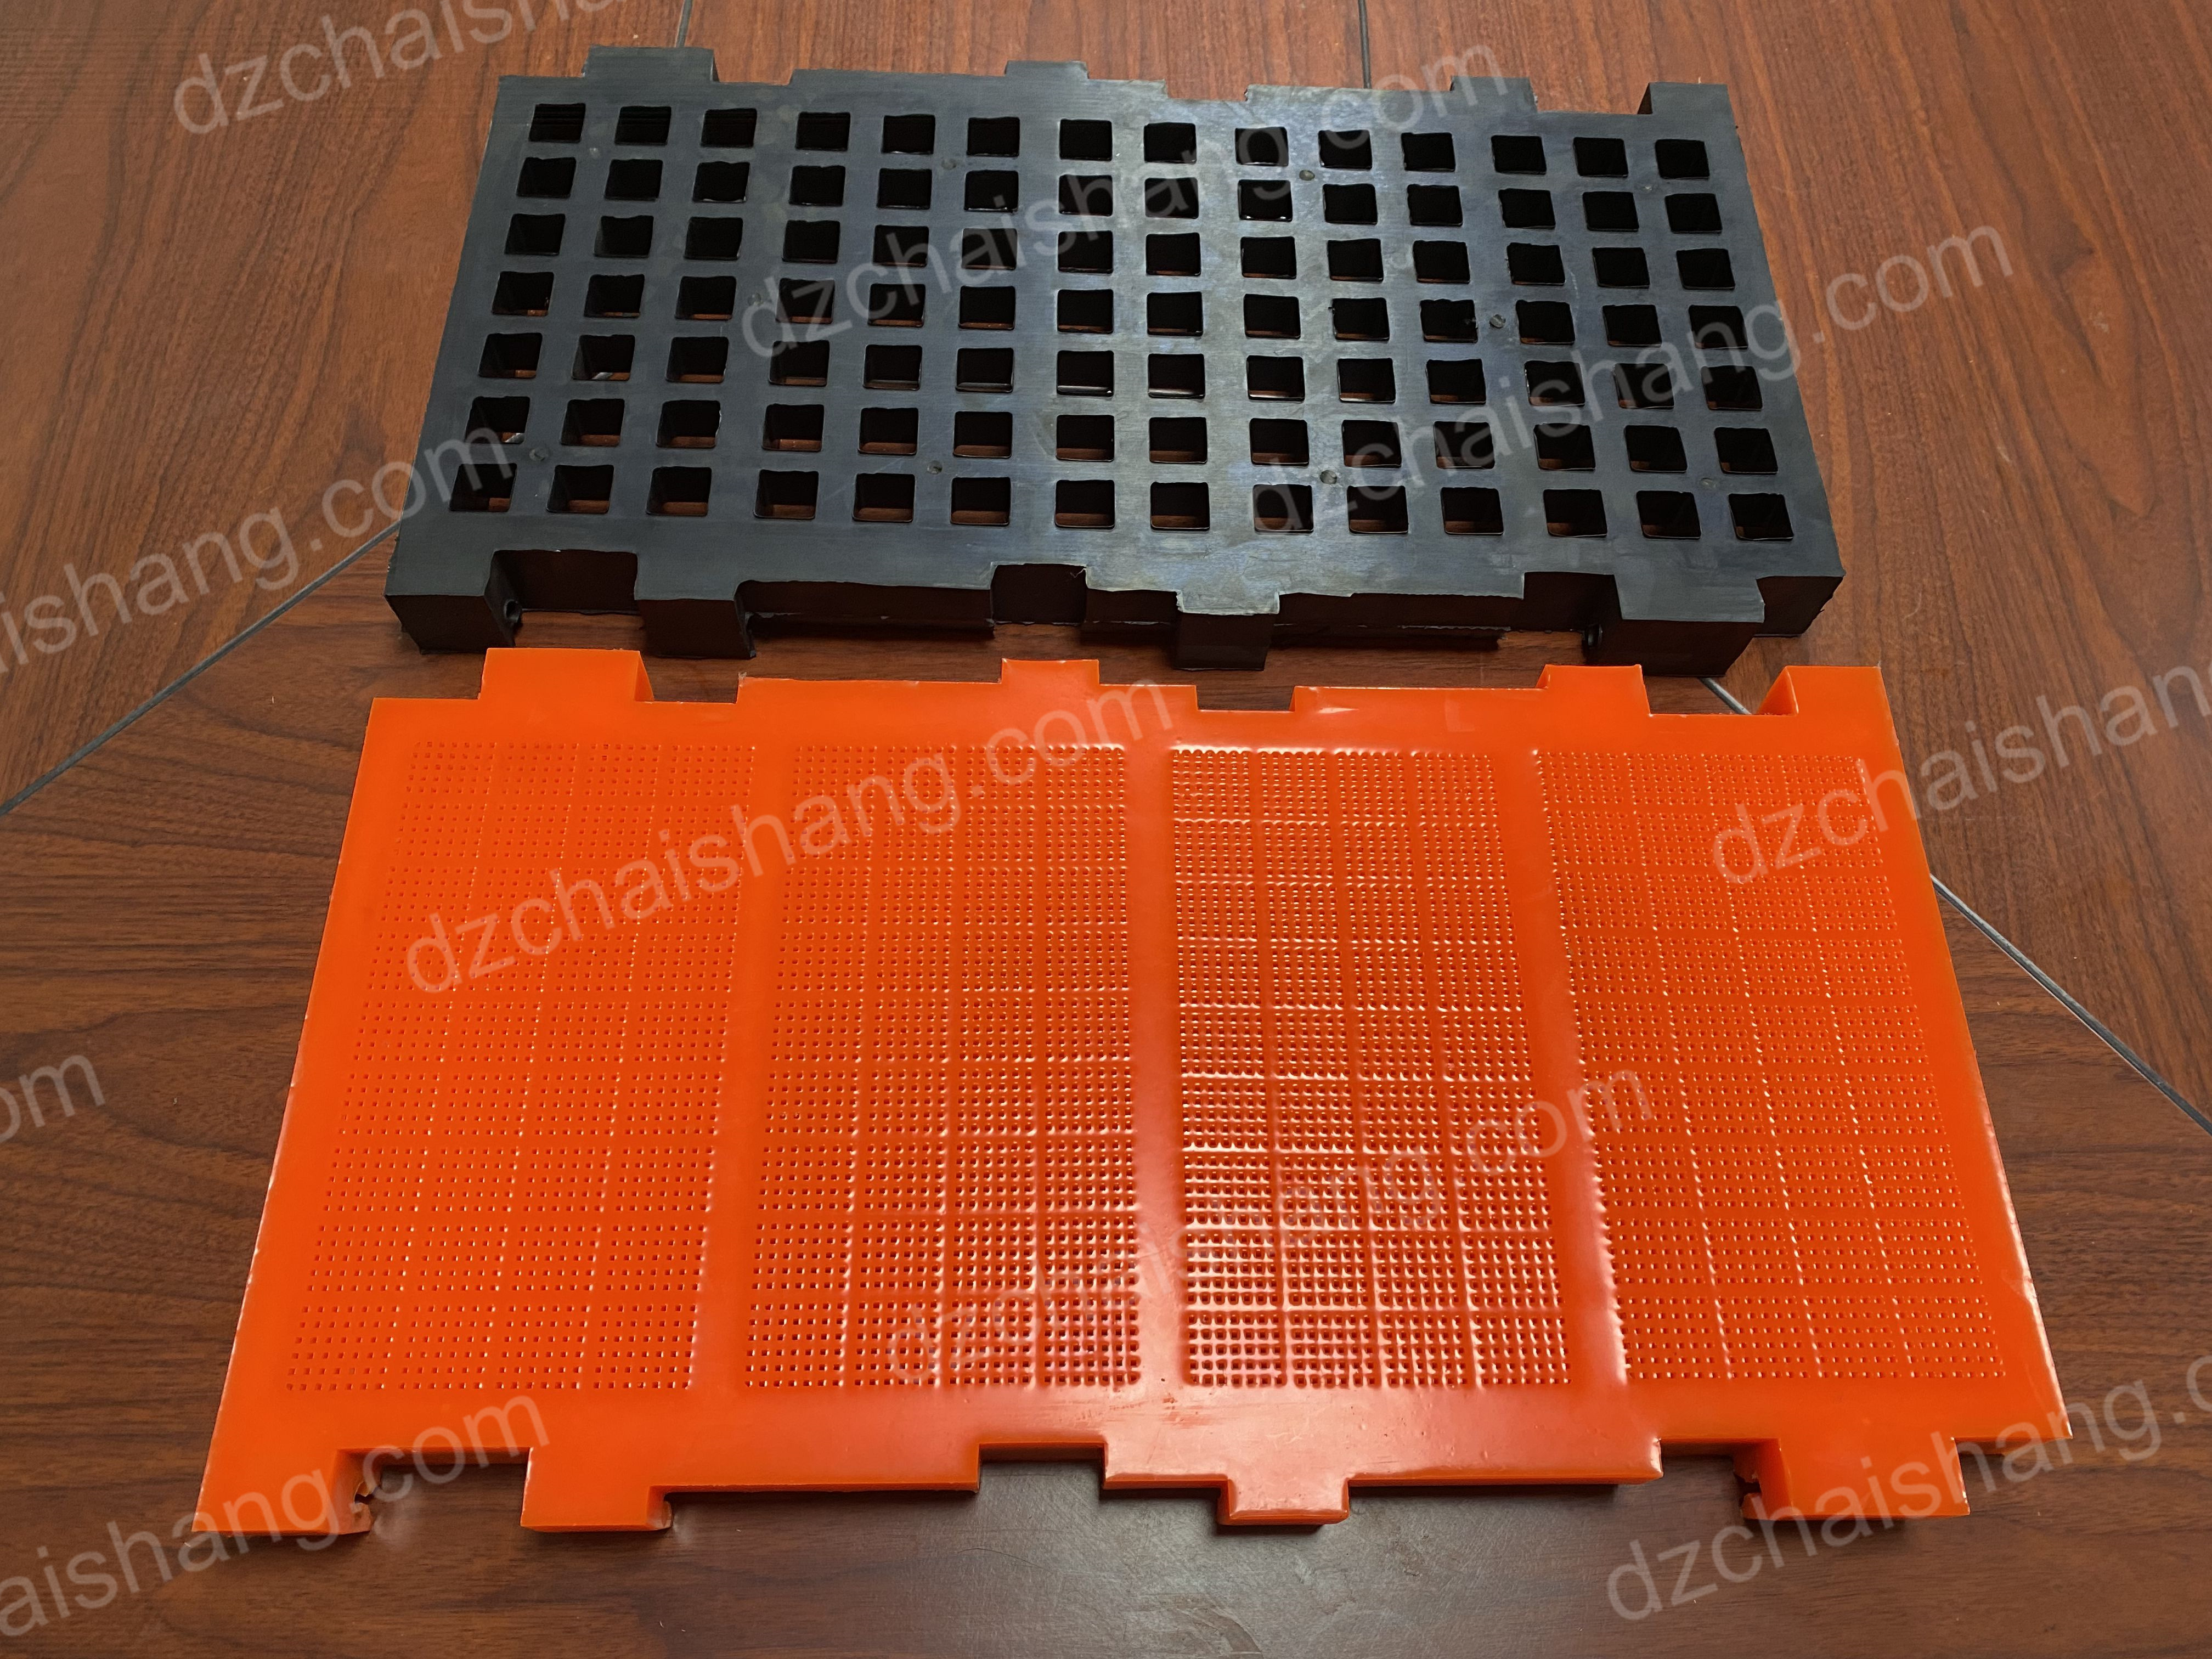 Discussion on structural design of mining rubber screen-CHAISHANG | Polyurethane Screen,Rubber Screen PanelsHigh frequency screen mesh,Belt Cleaner,Flotation Cell